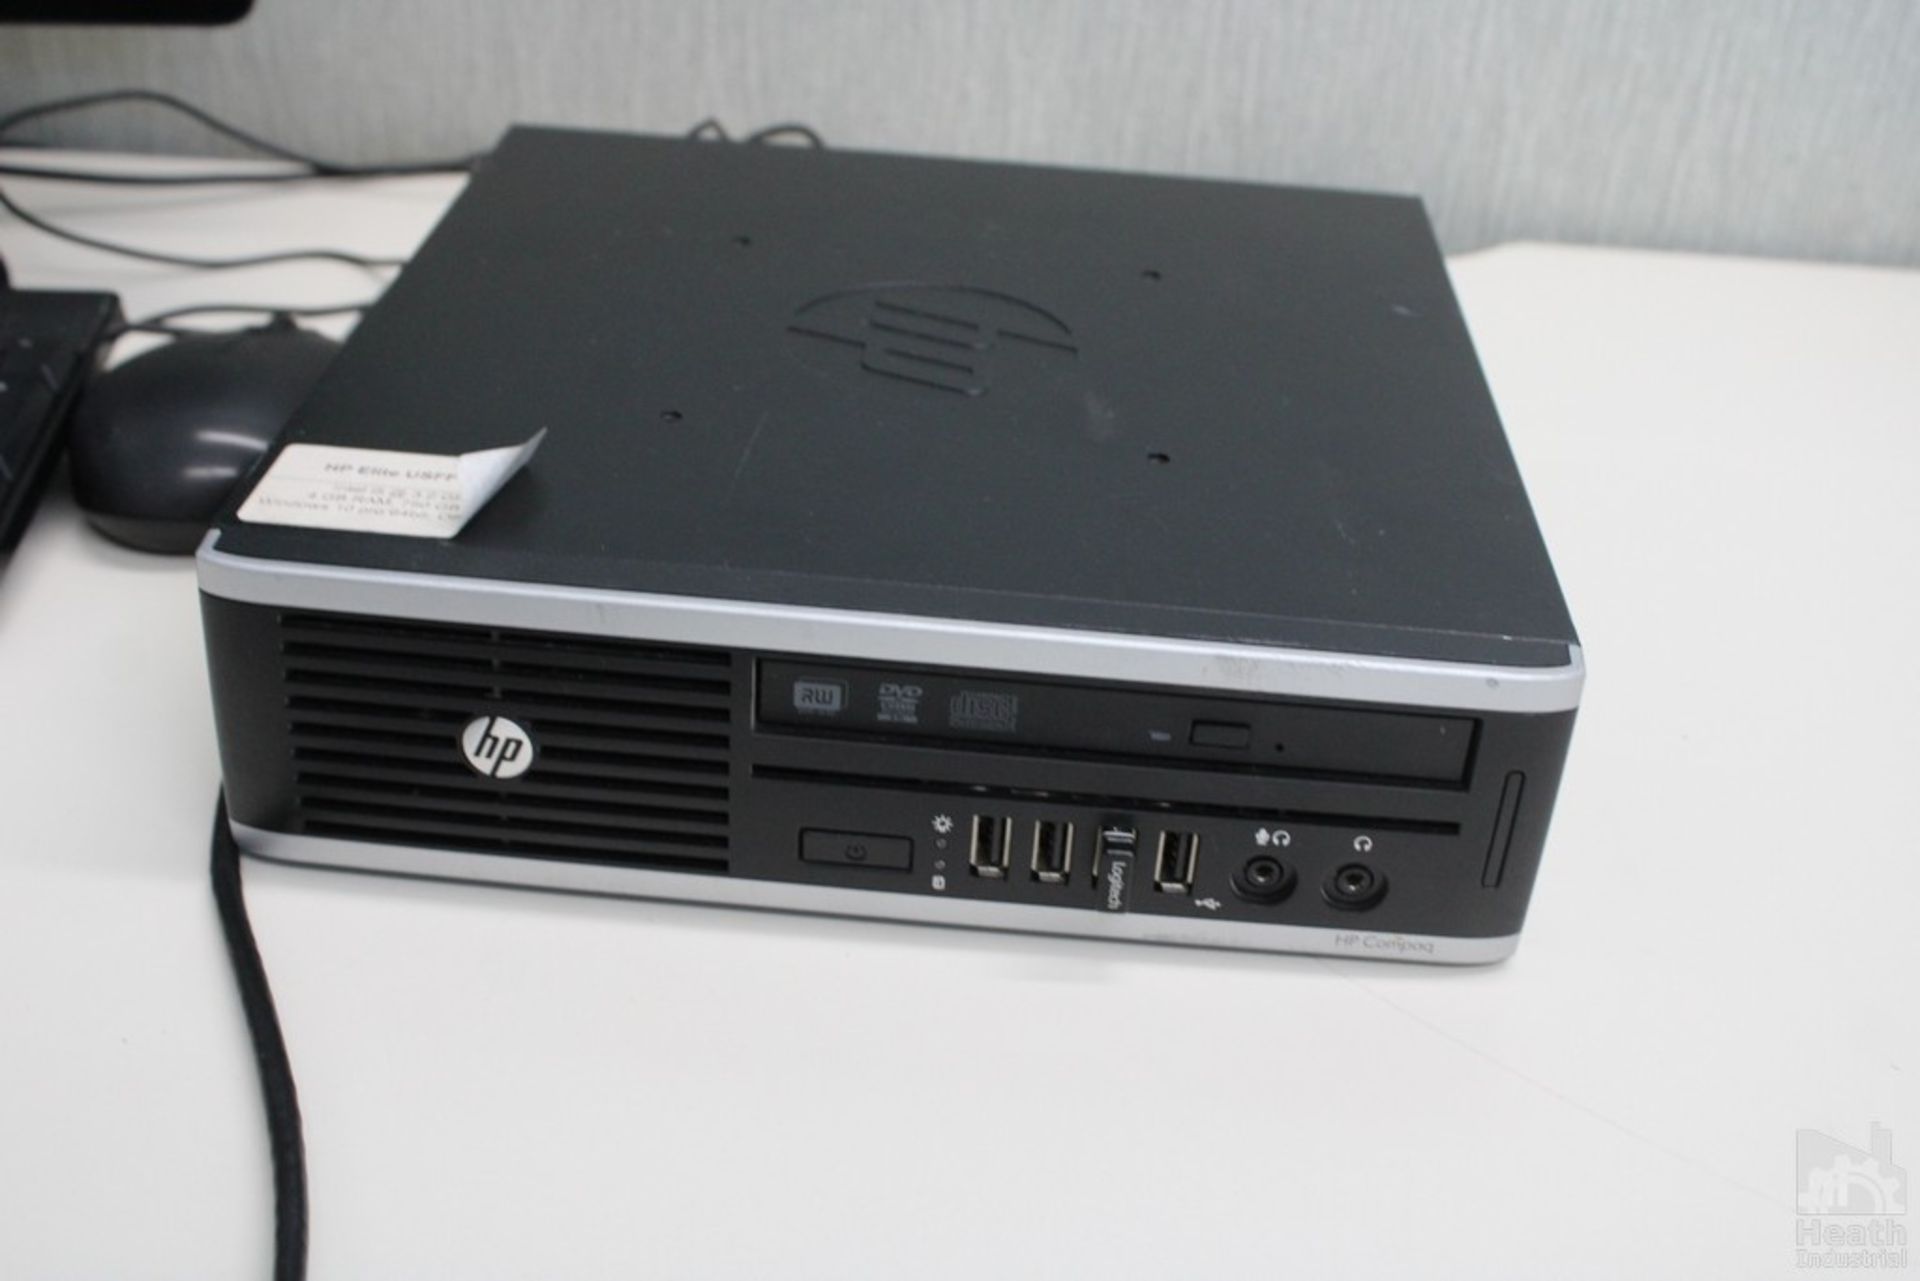 HP ELITE USFF 8300 COMPUTER WITH MONITOR AND KEYBOARD - Image 2 of 3